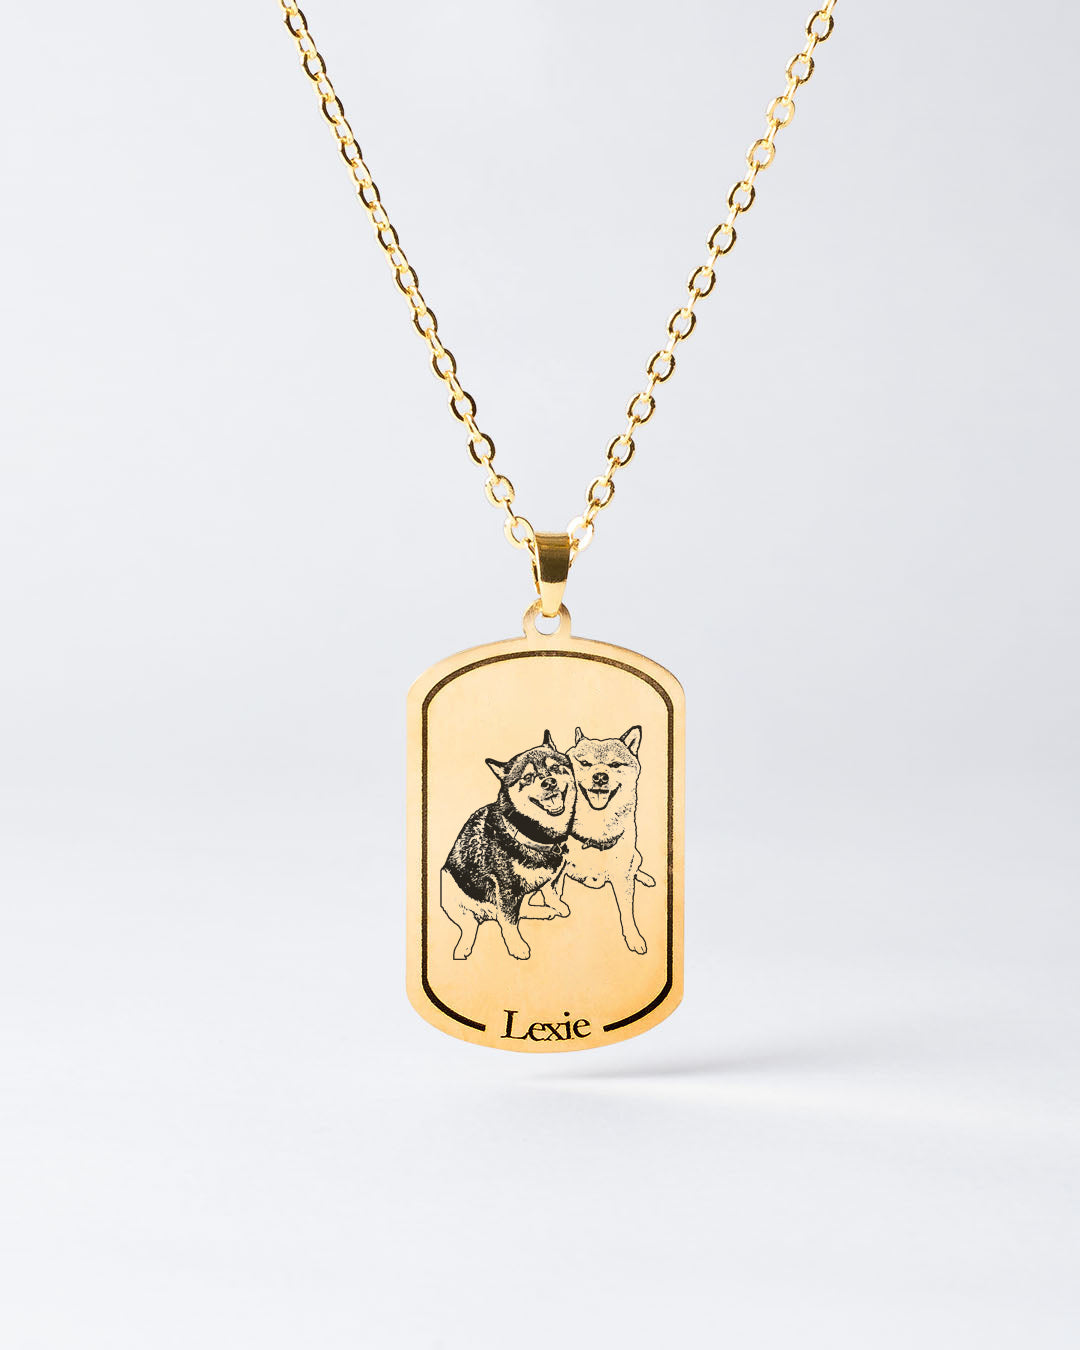 Personalized Dogtag Necklace with Custom Engraved Dog Photo - Unique Memorial Gift for Dog Owners